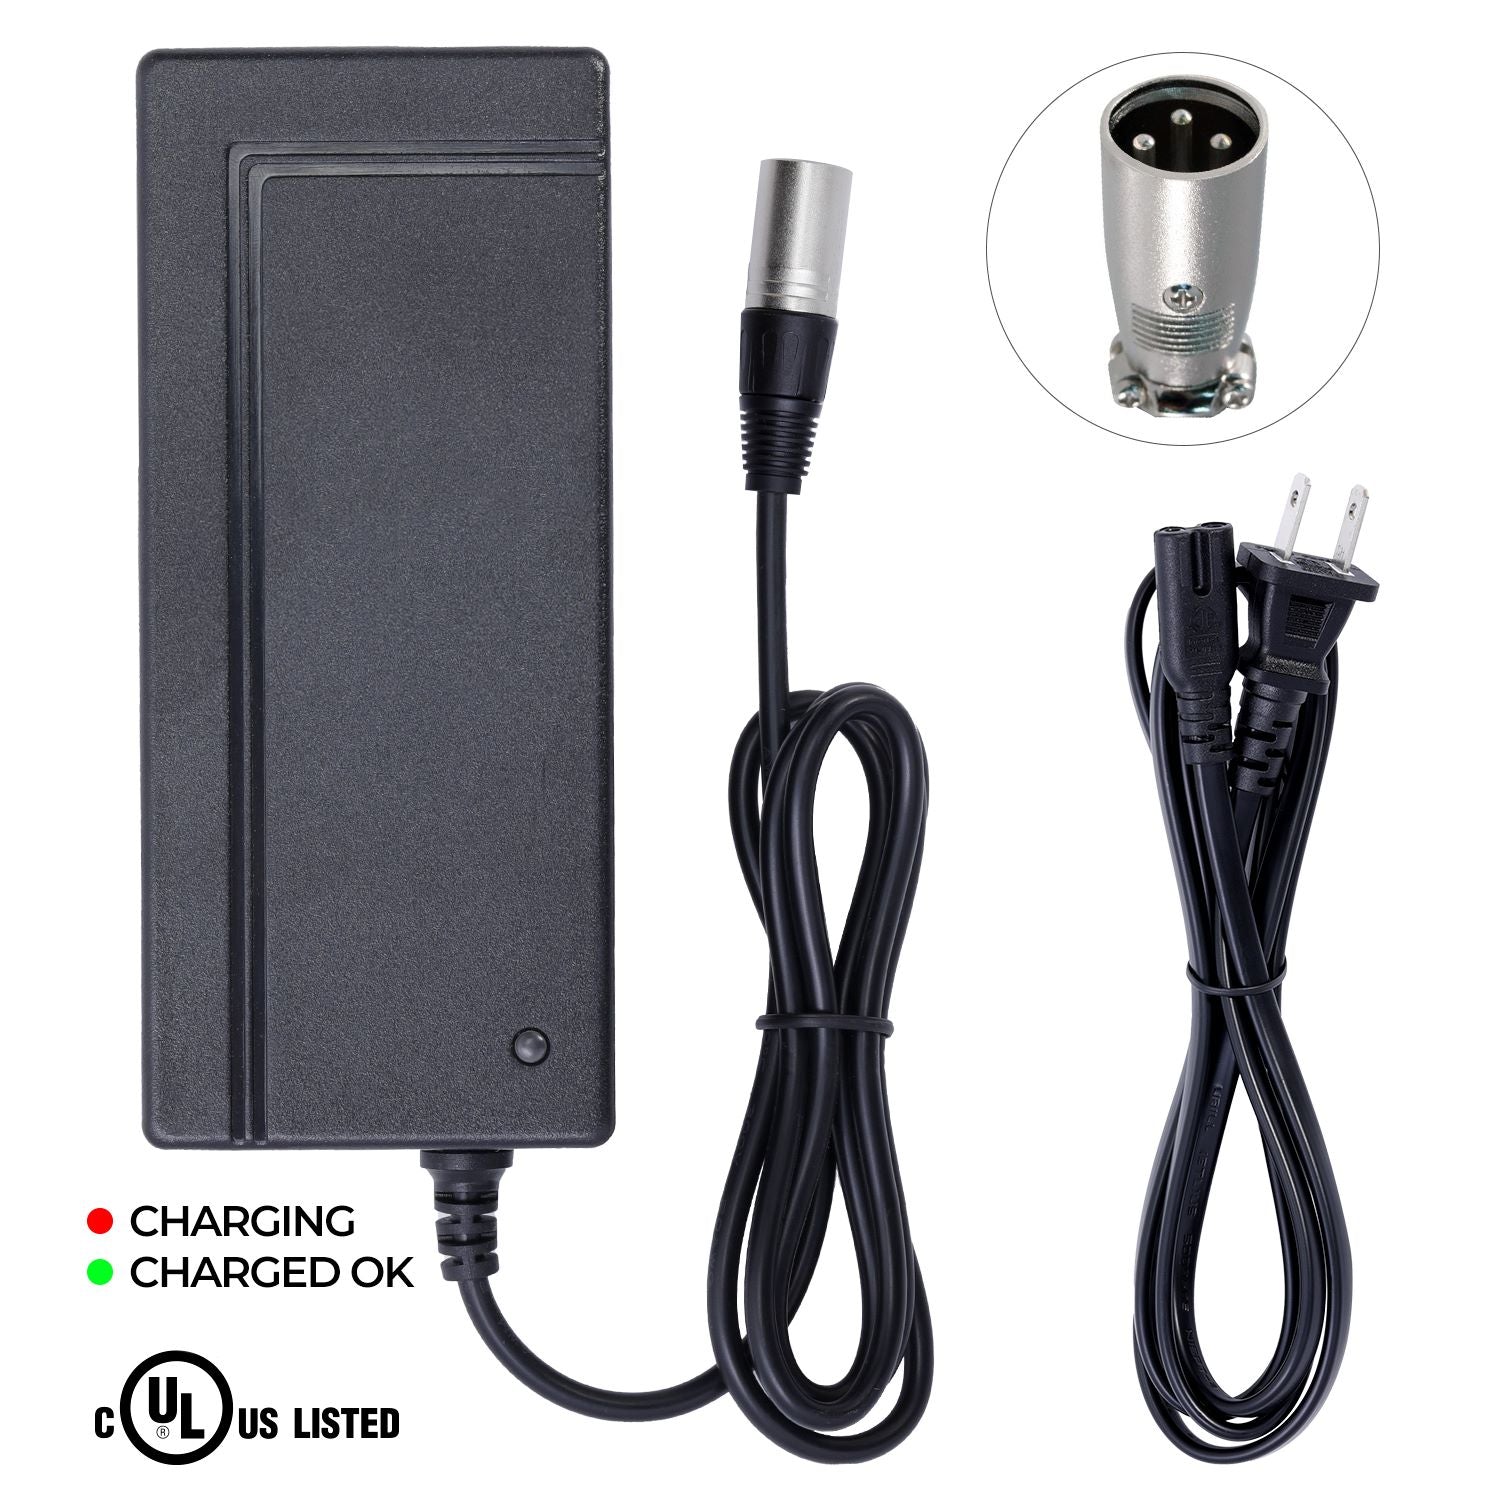 Charger for KYMCO Vivio Electric Power Chair